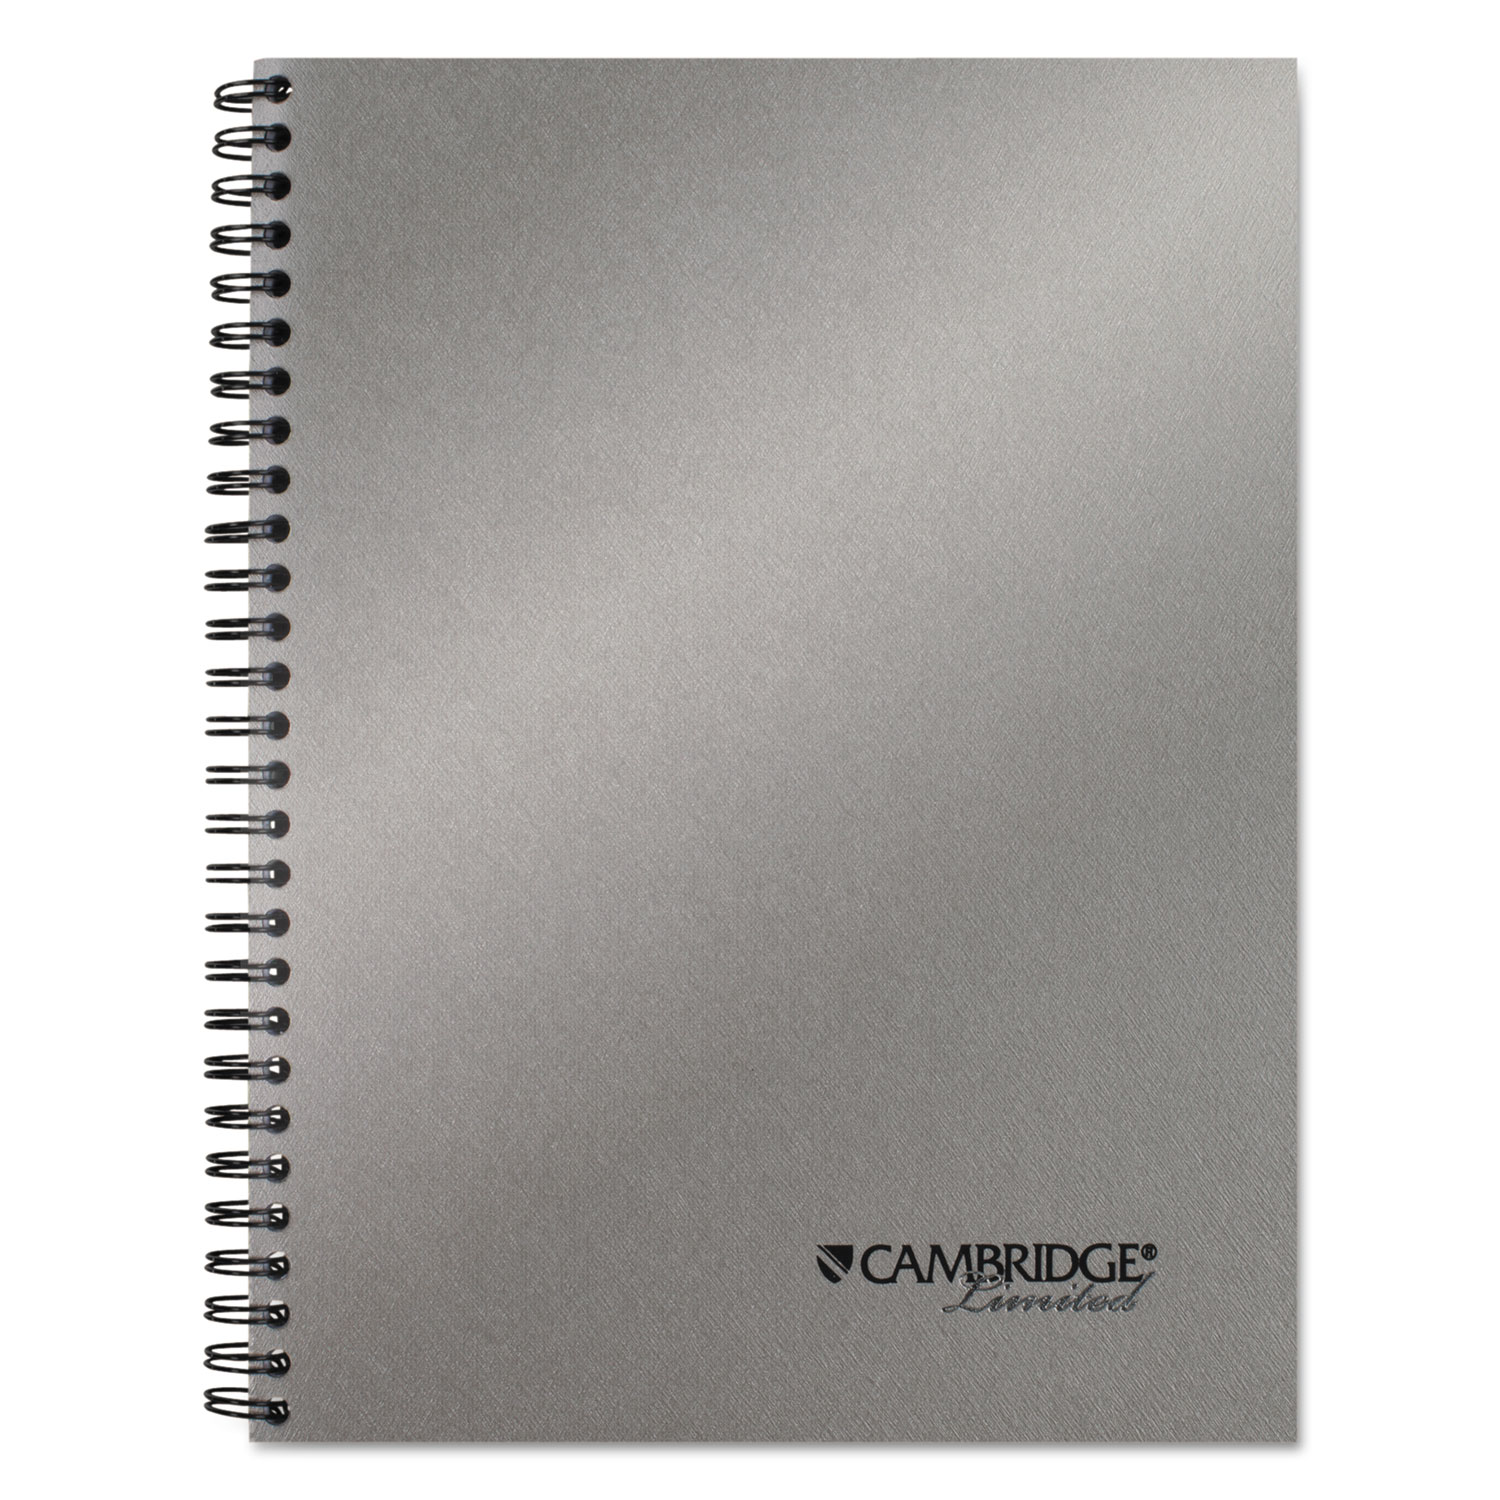 Side Bound Guided Business Notebook, 7 1/2 x 9 1/2, Metallic Silver, 80 Sheets